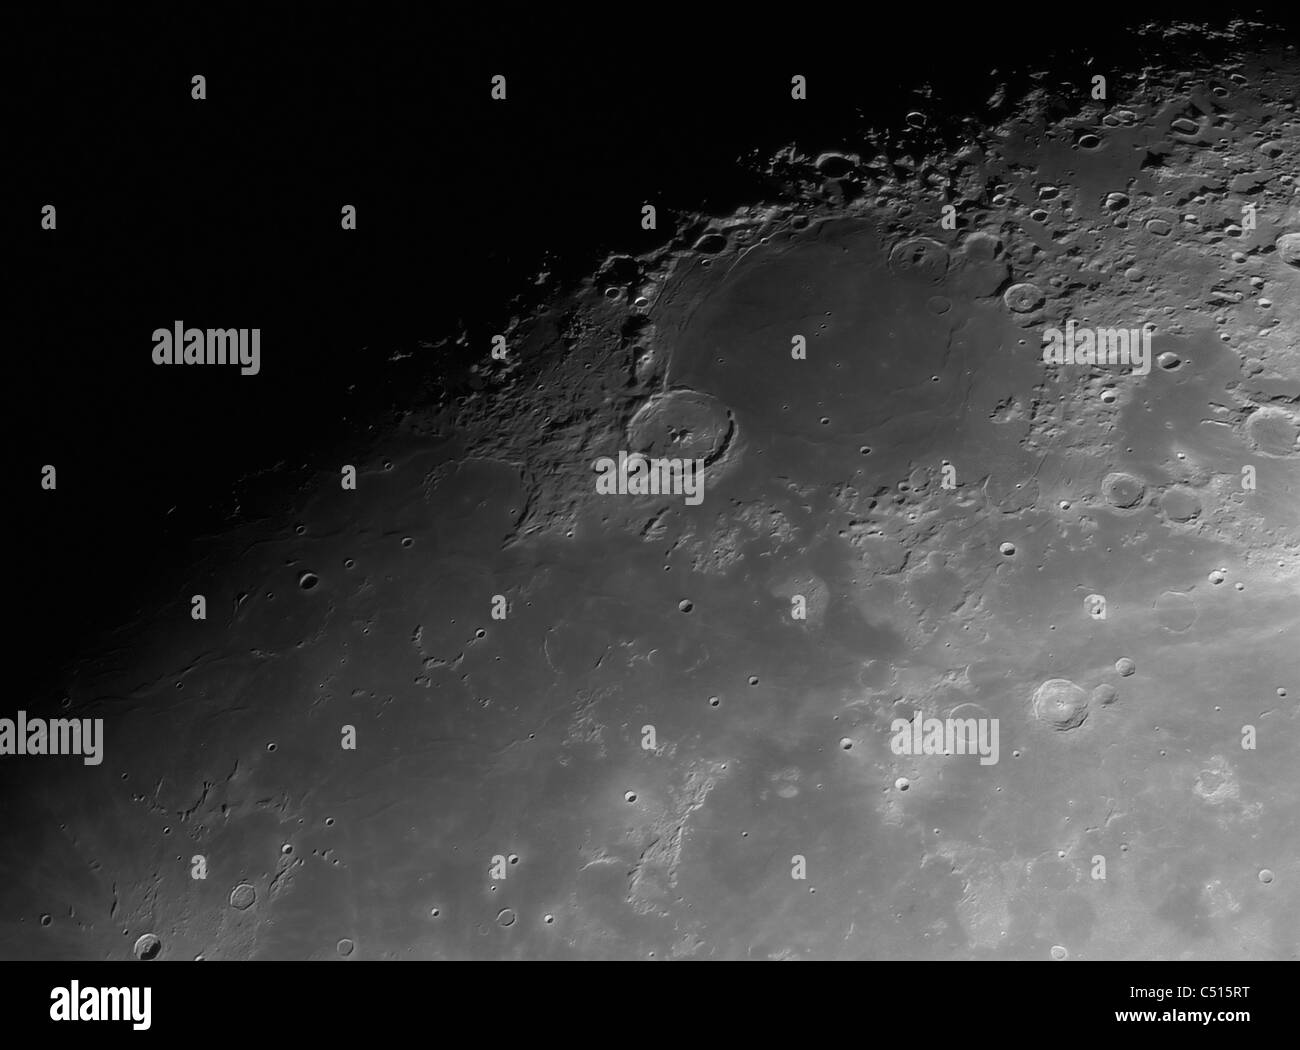 Close-up detail view of the moon. Stock Photo